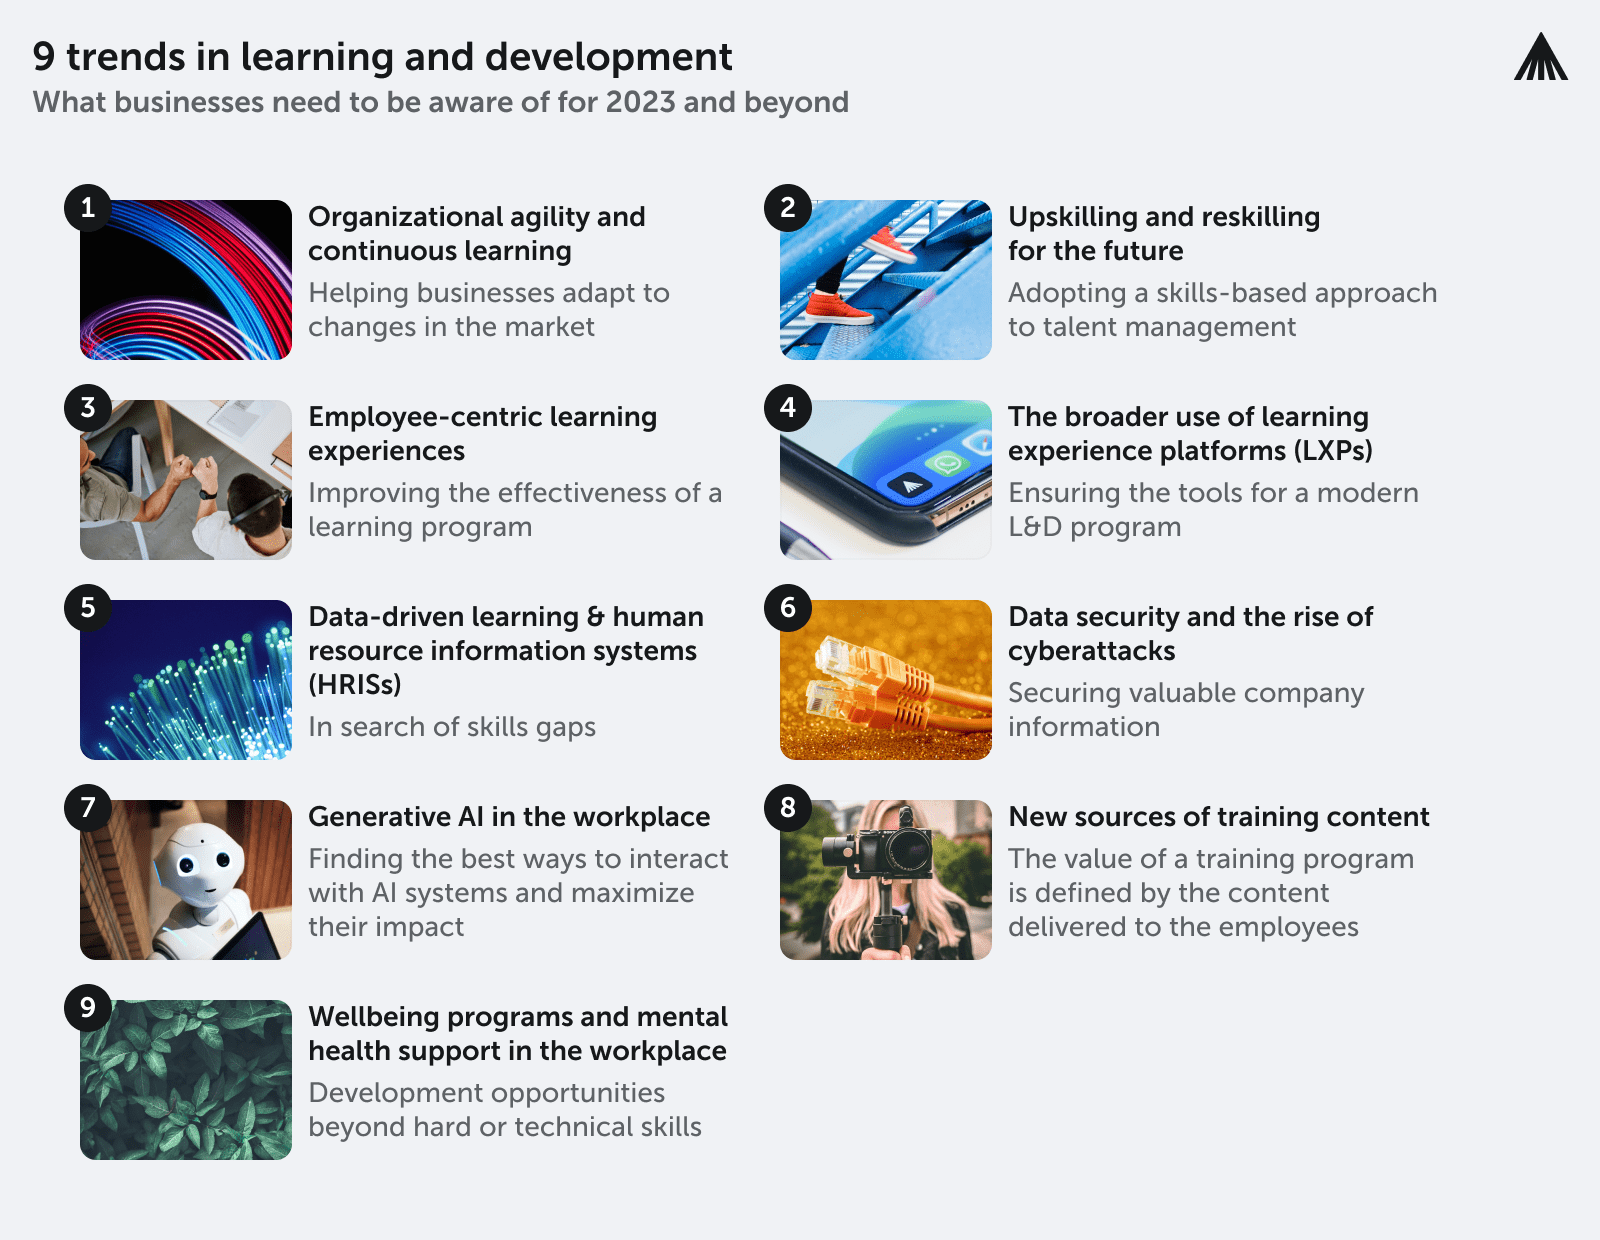 The list of Learning and Development trends